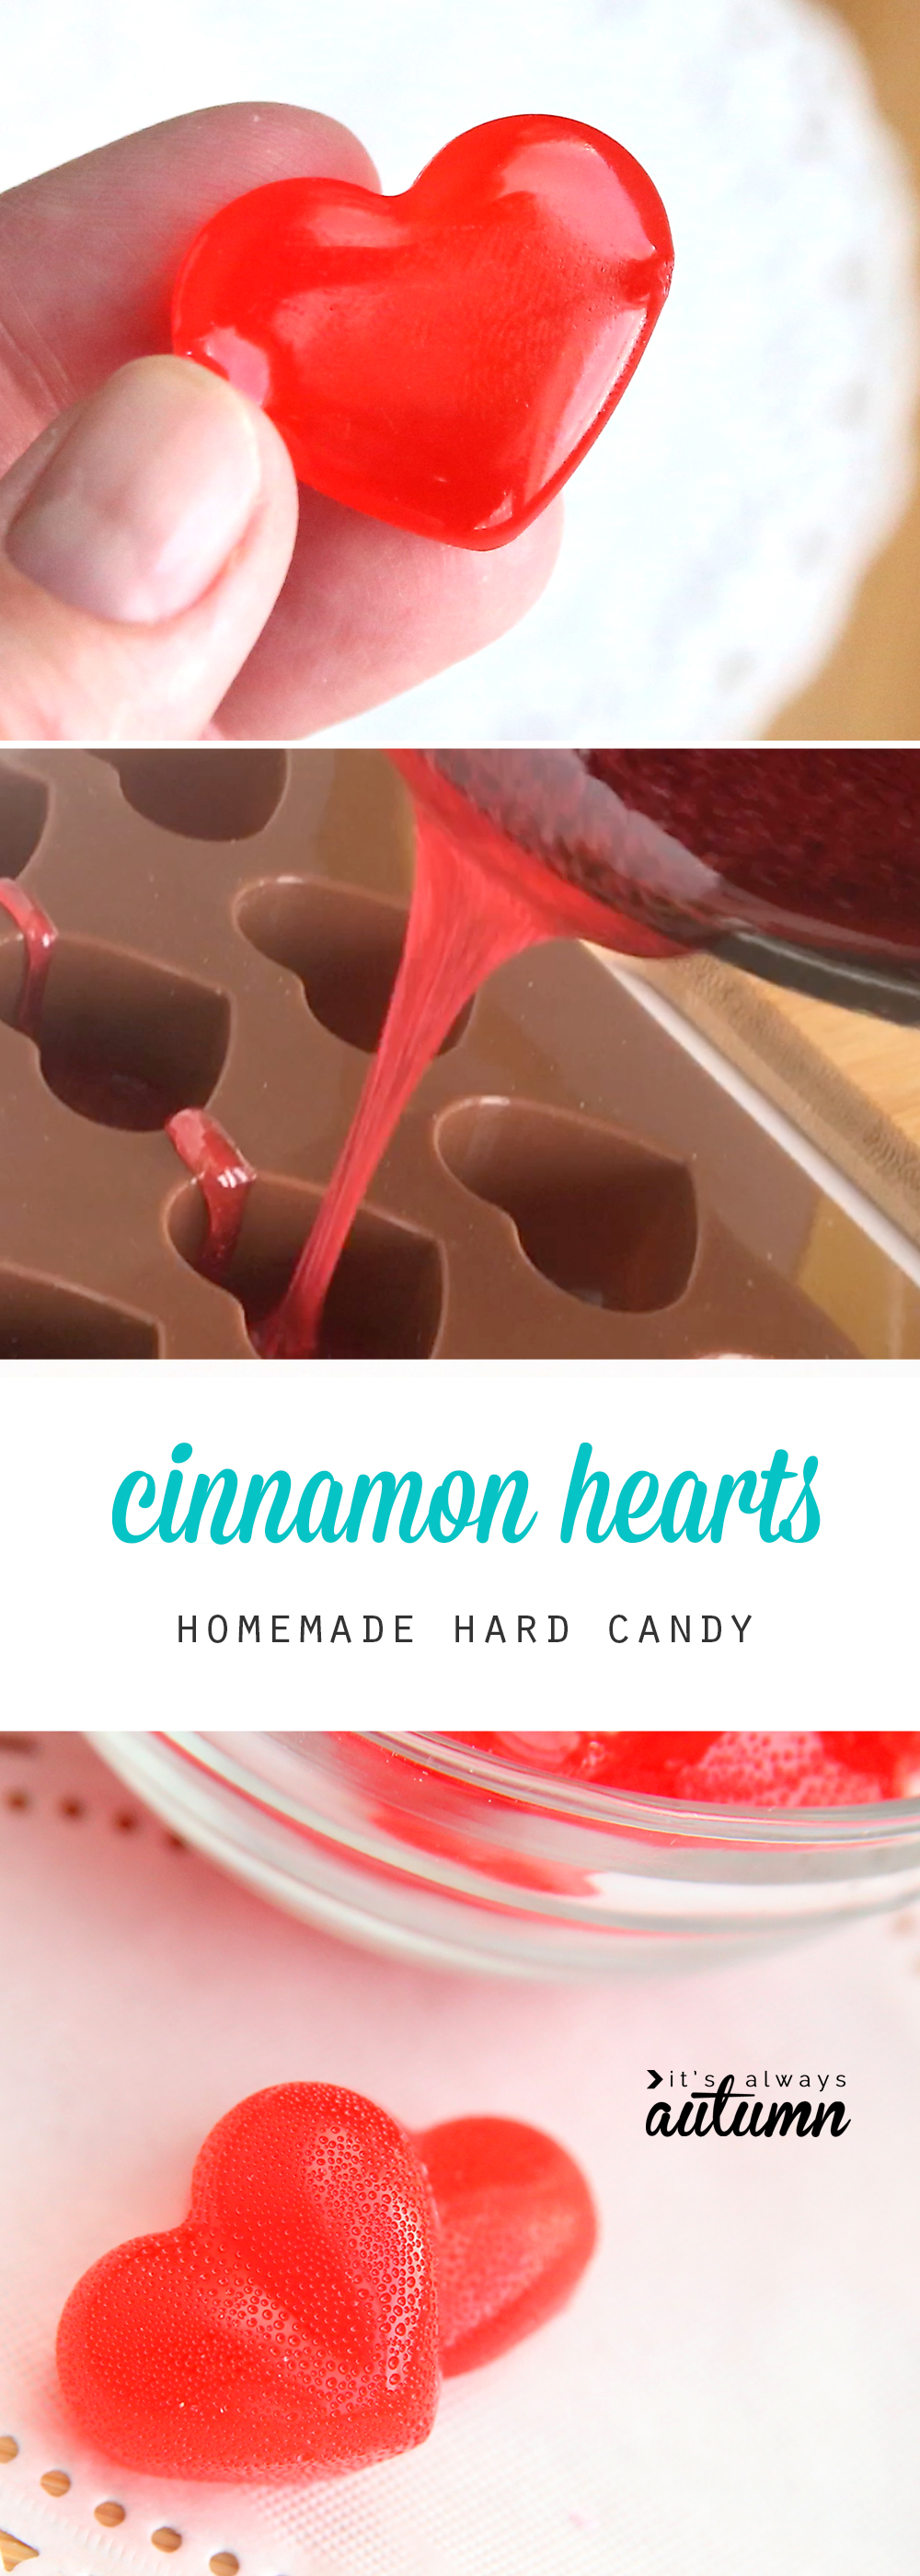 Cinnamon heart candy; melted candy being poured into heart molds